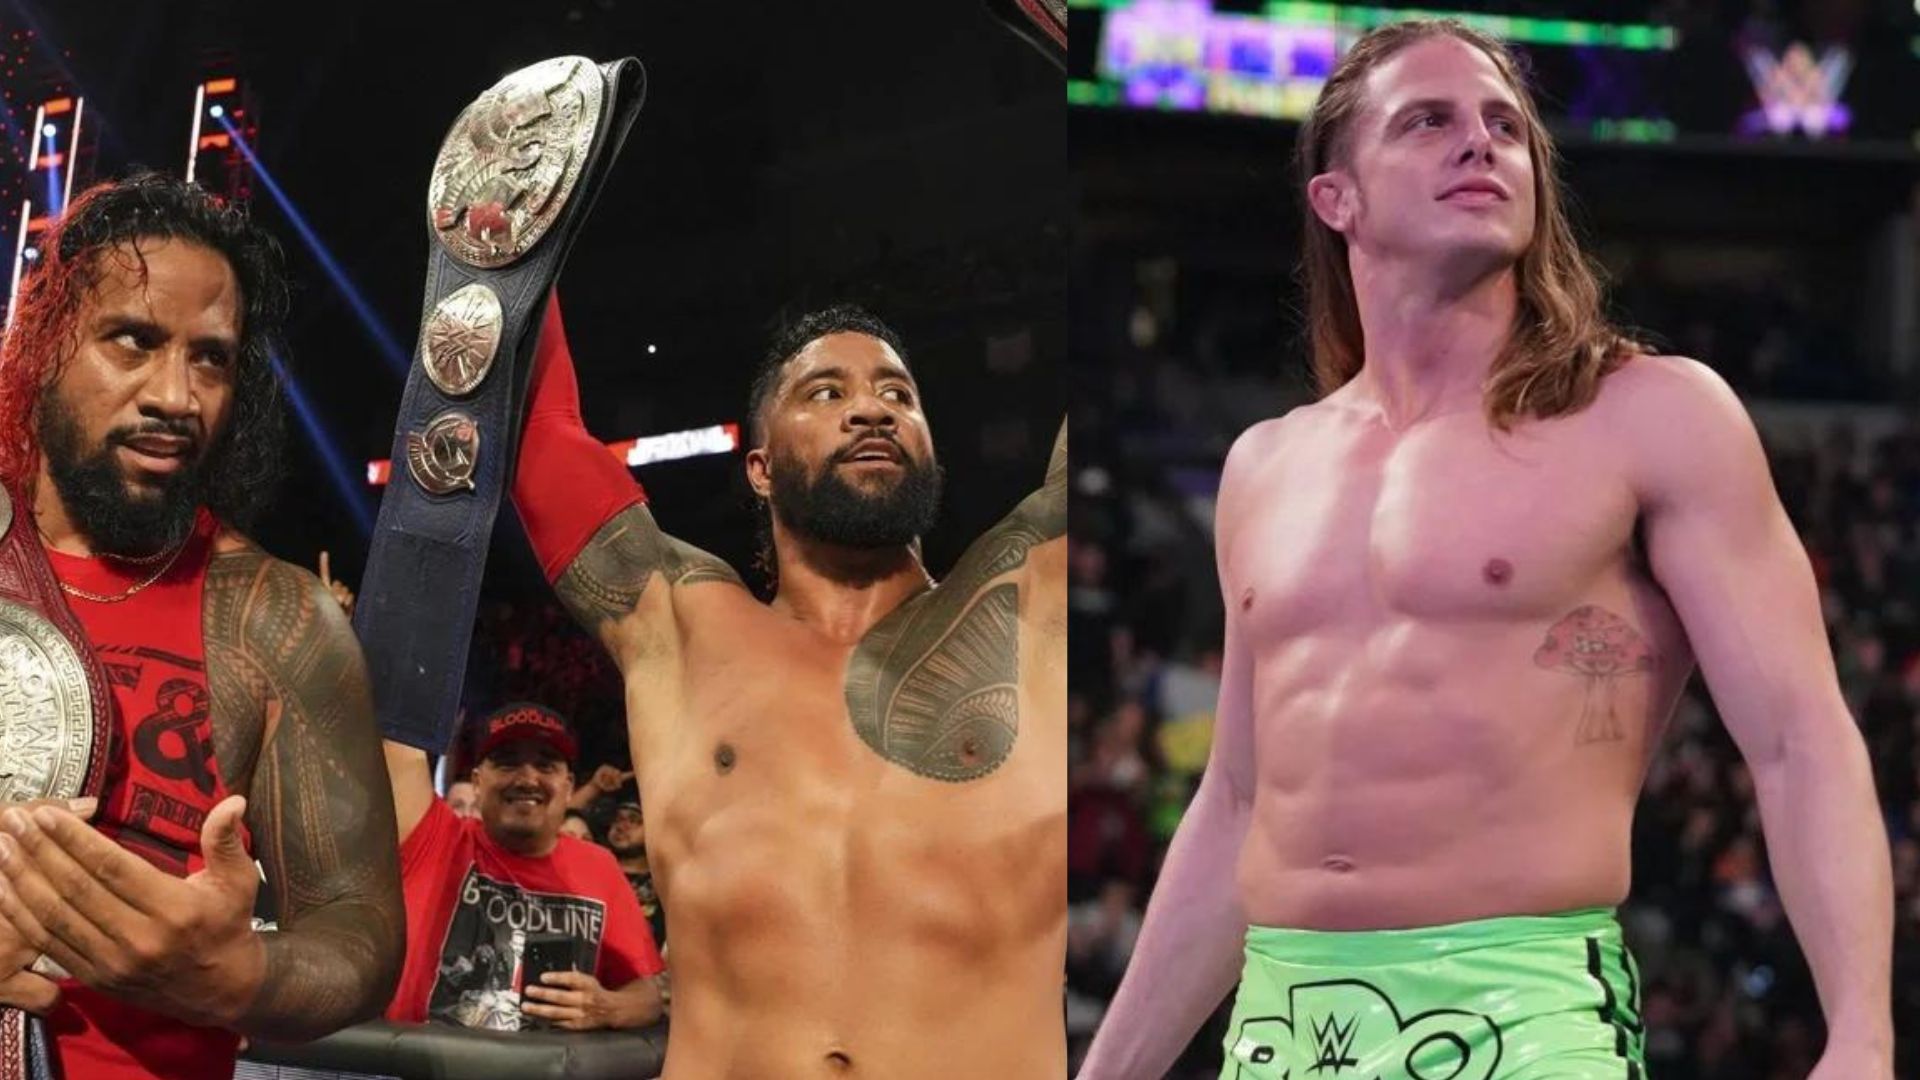 The upcoming WWE RAW will feature a championship match and more exciting segments